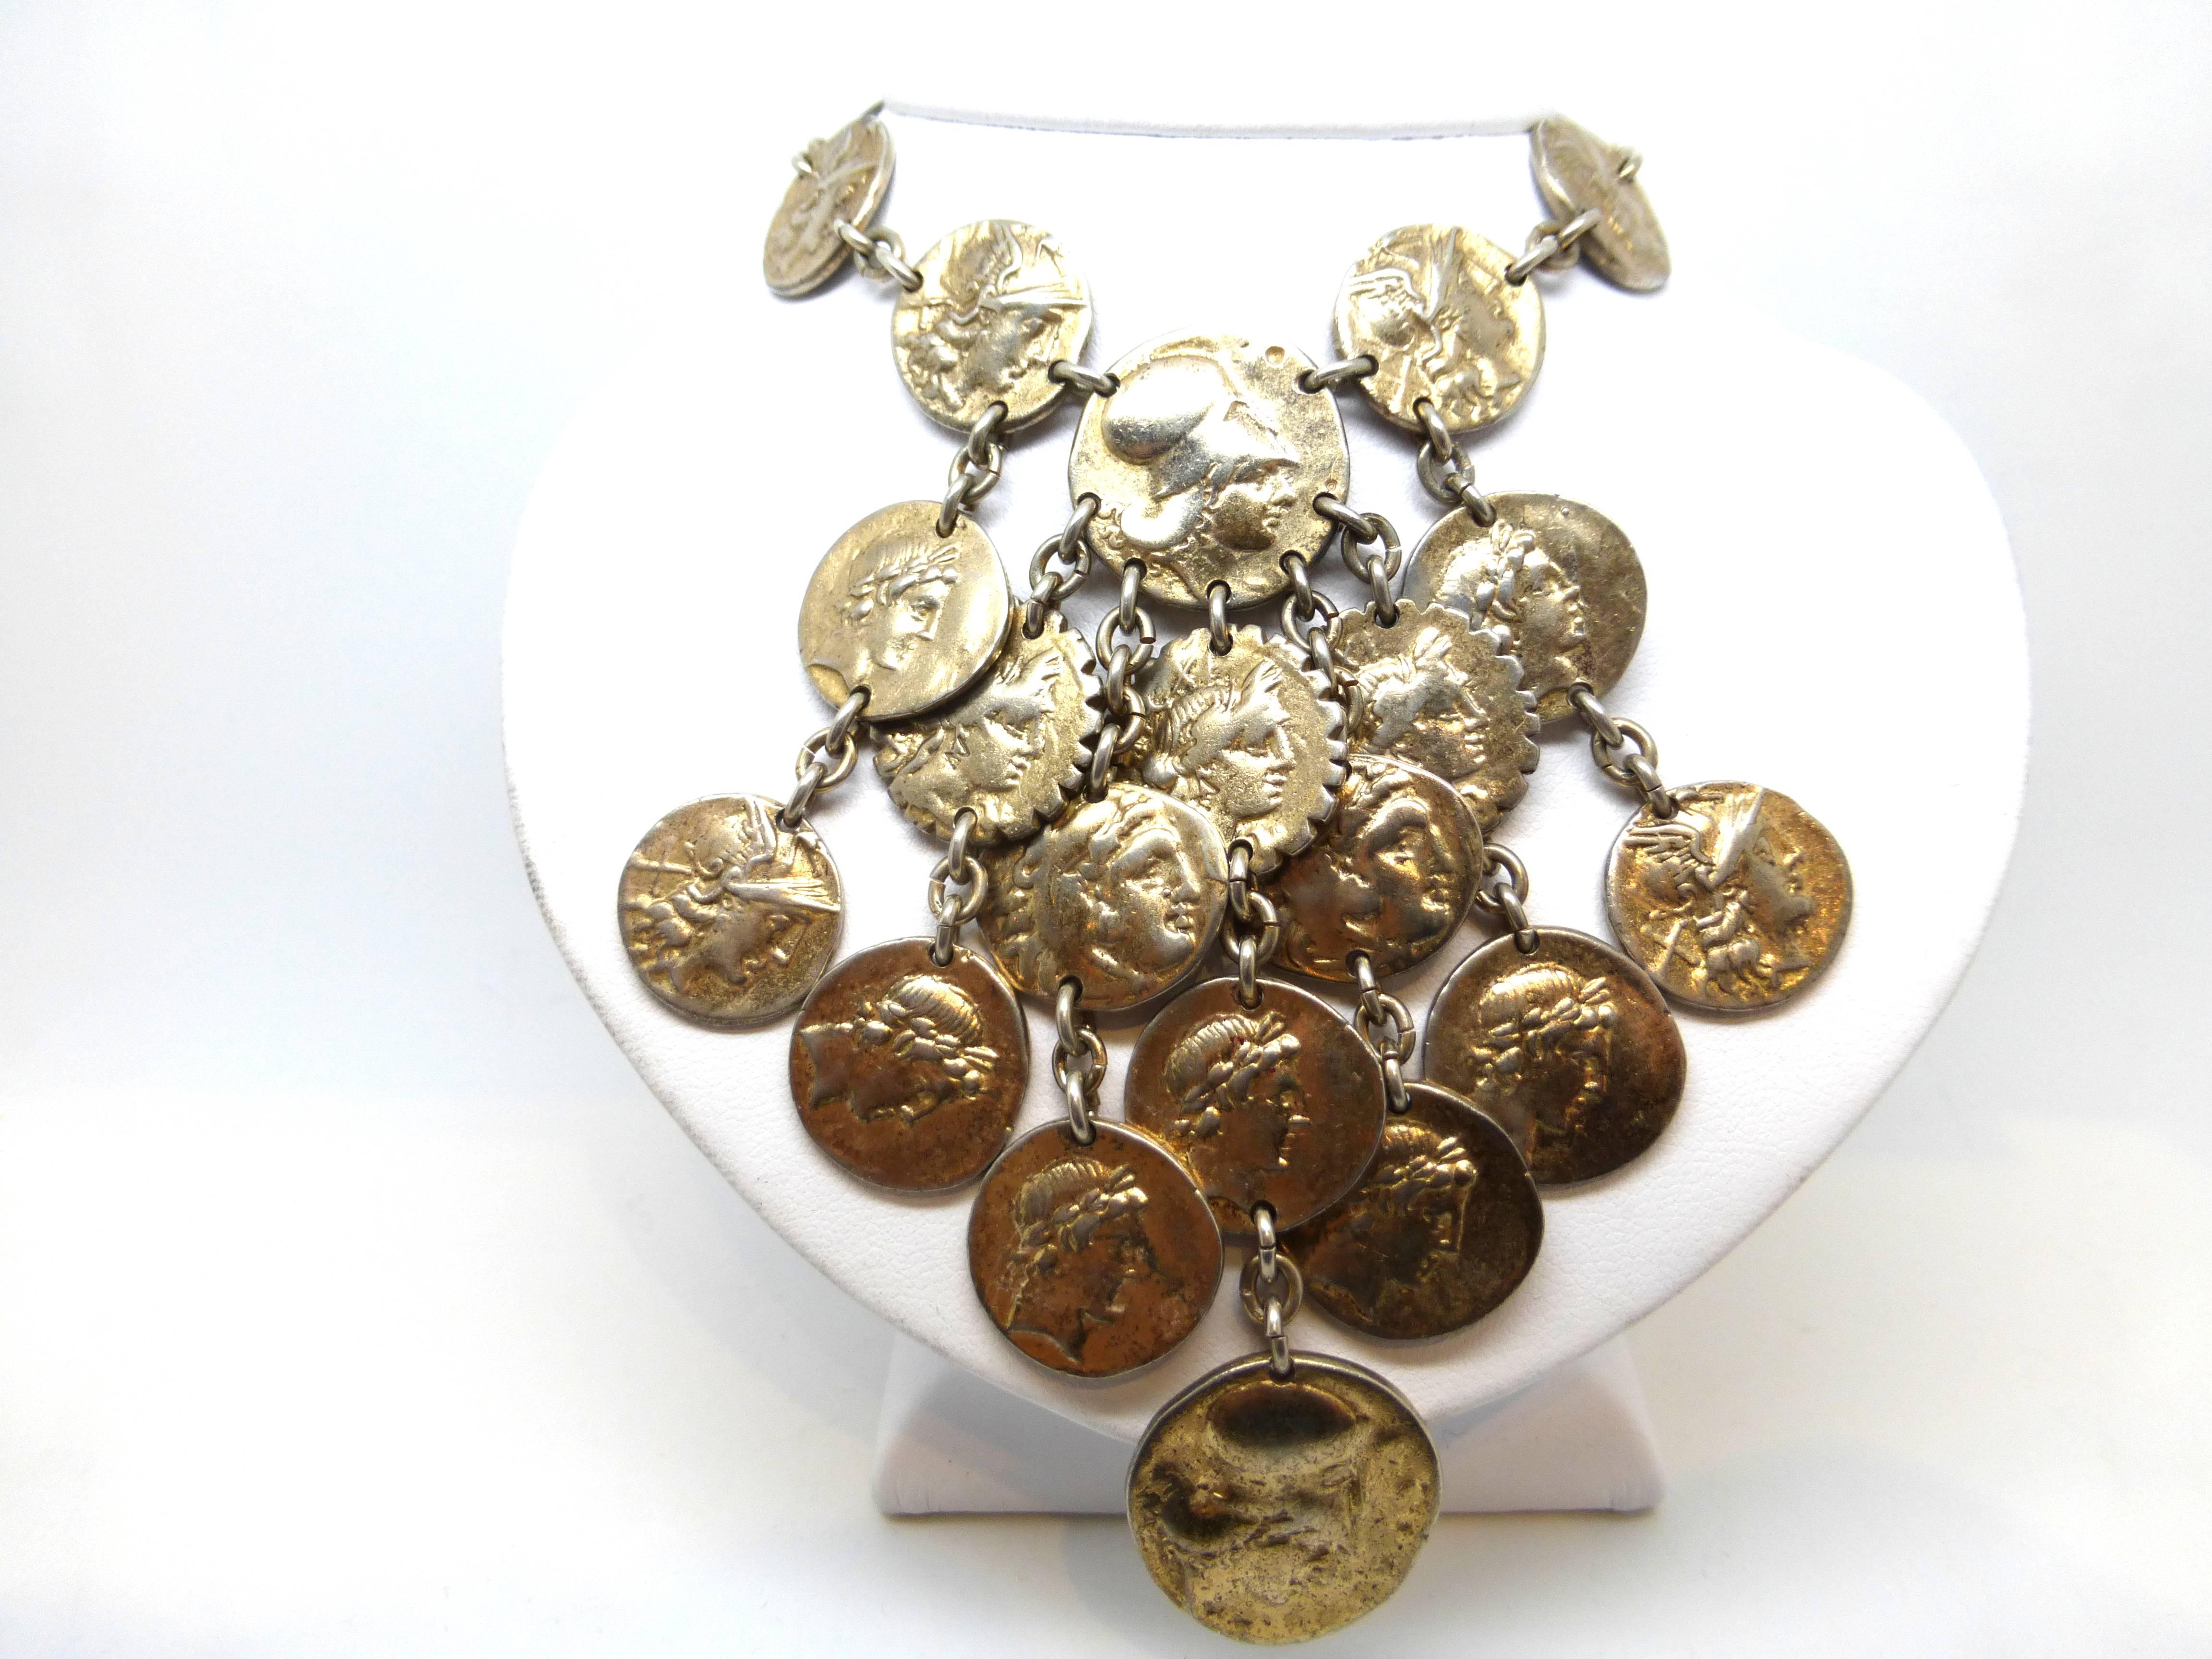 Nettie Rosenstein, Mid Century, sterling silver - gilt, Classical Greek Revival necklace, decorated with faux Greek Drachma coins depicting a Greek soldier's head on one side and a chariot, horse and rider on the other, Ca. 1940's-1950's. A little